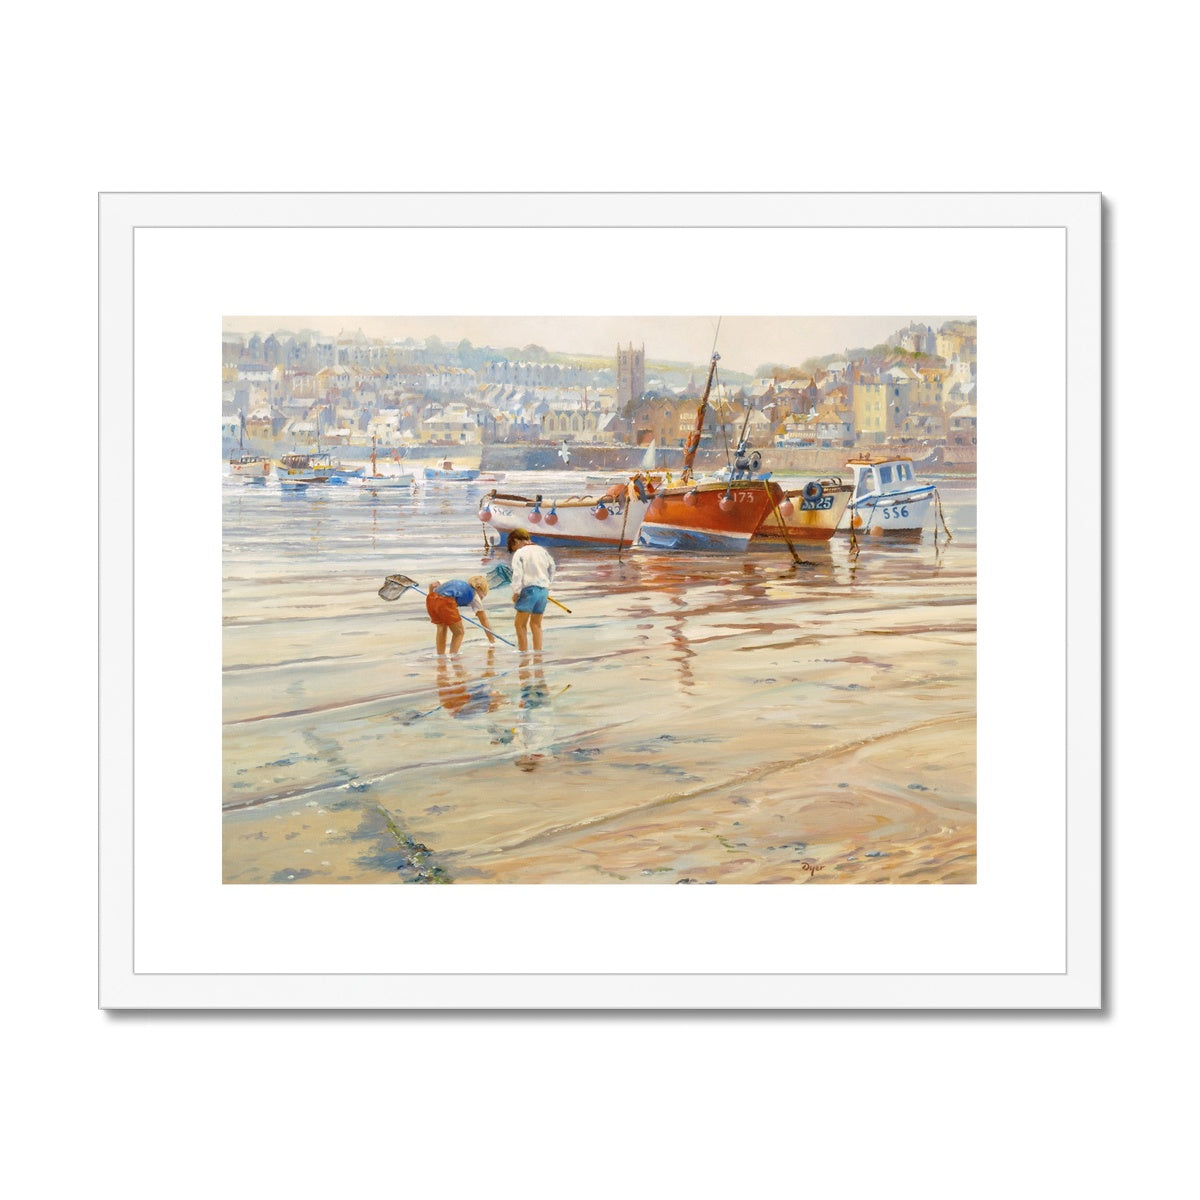 Ted Dyer Framed Open Edition Cornish Fine Art Print. 'Calm Waters, St Ives Harbour'. Cornwall Art Gallery